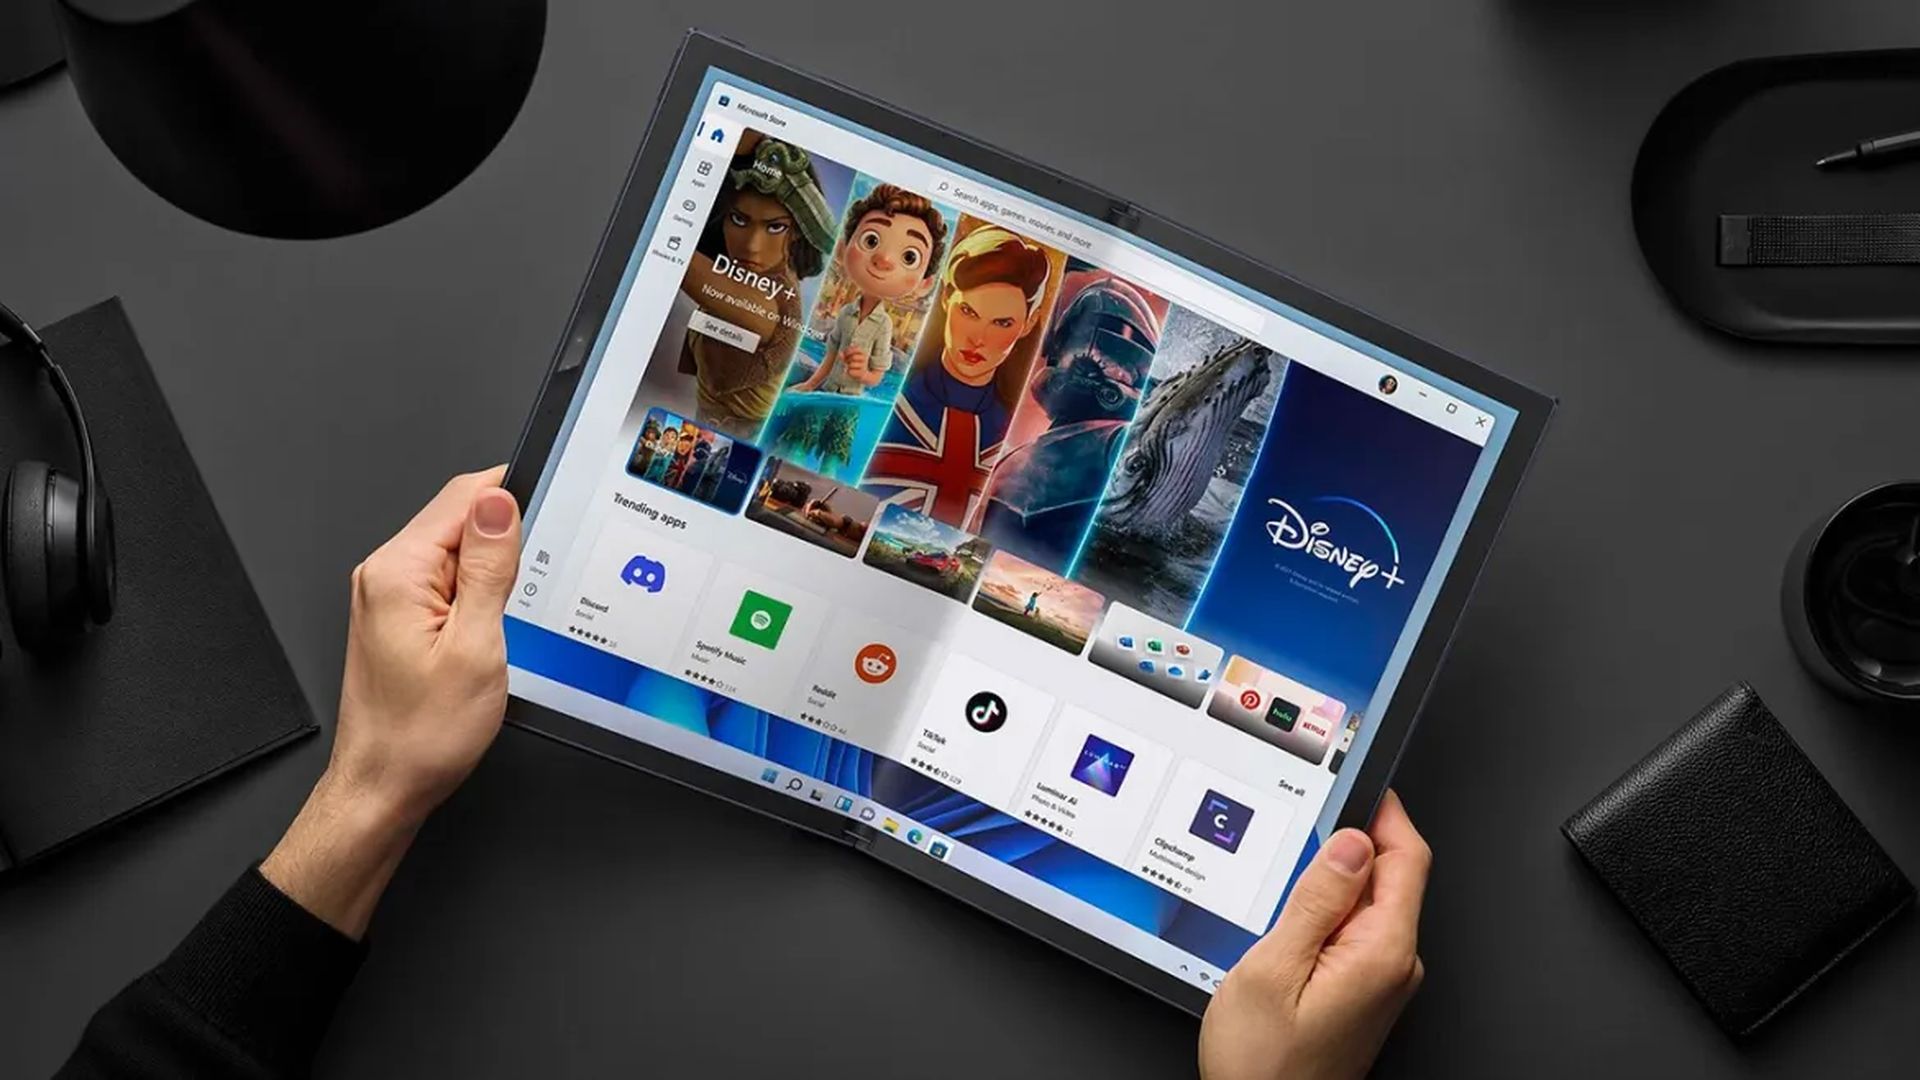 Recently, Asus unveiled the Zenbook 17 Fold OLED, a 17.3-inch laptop with two 12.5-inch panels that can be folded in half. We are here to discuss its specs, price and release date!